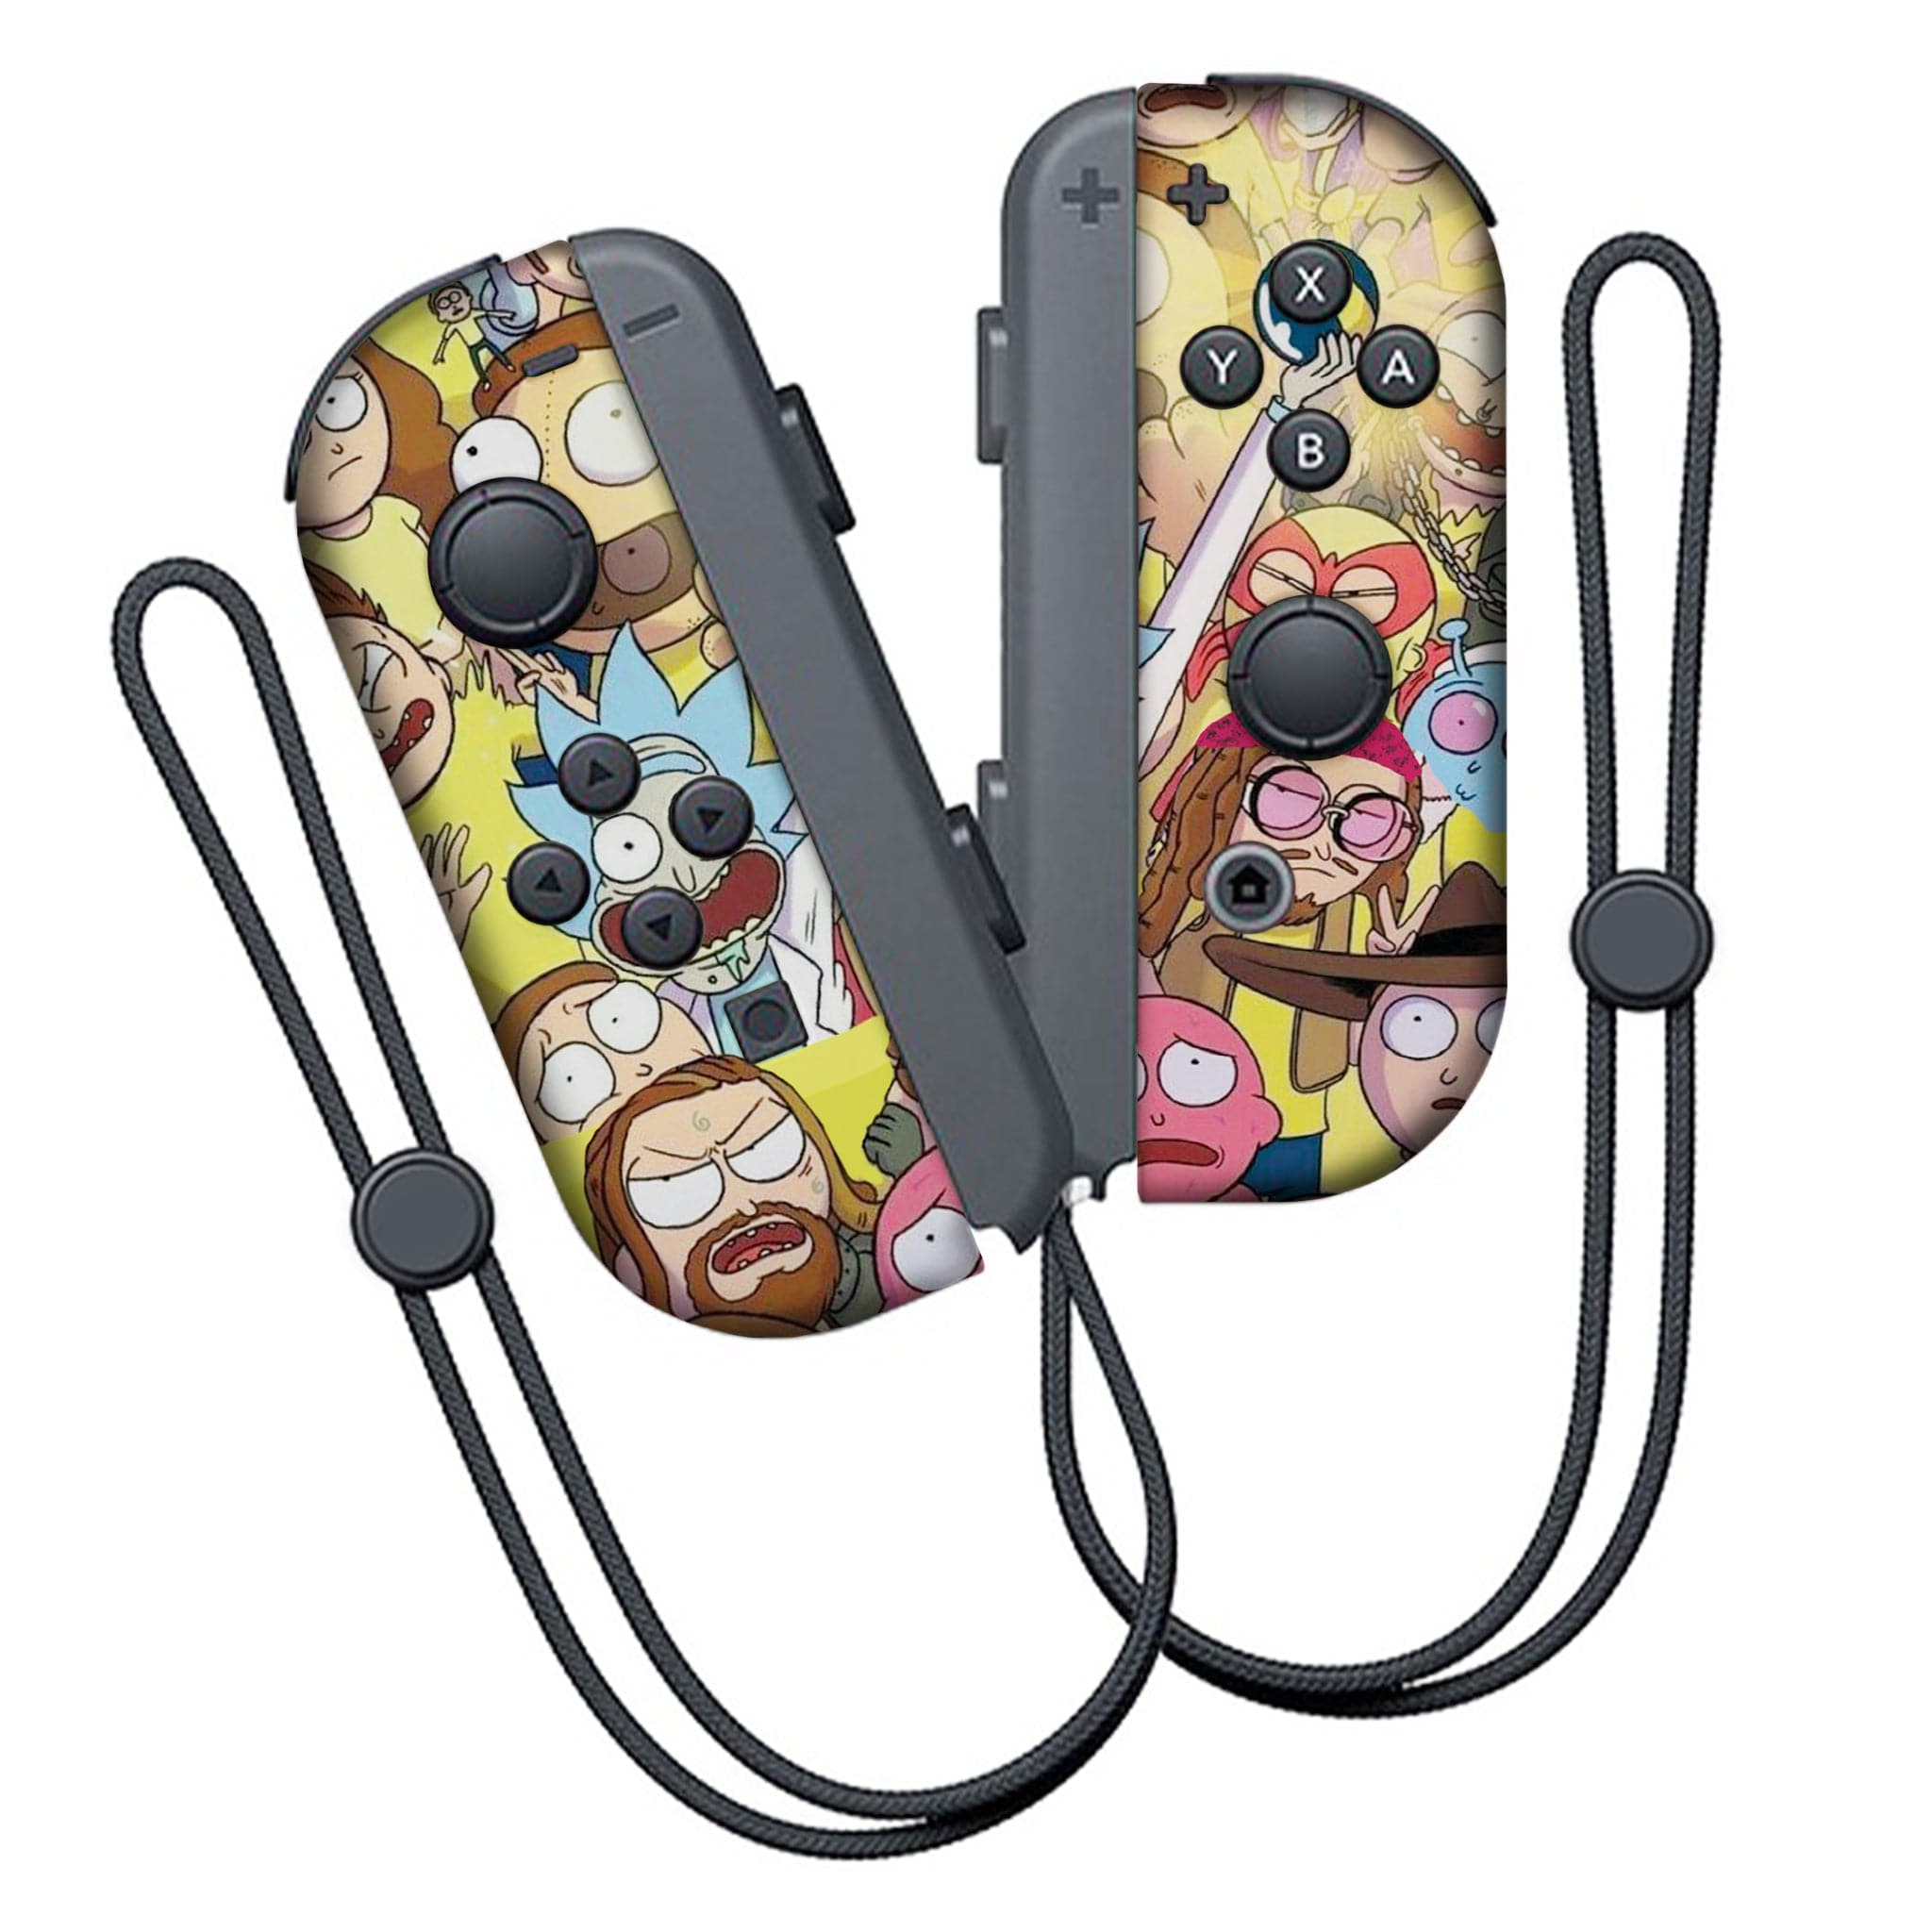 Nintendo Switch Joy-Con [L/R] Controllers - Rick and Morty